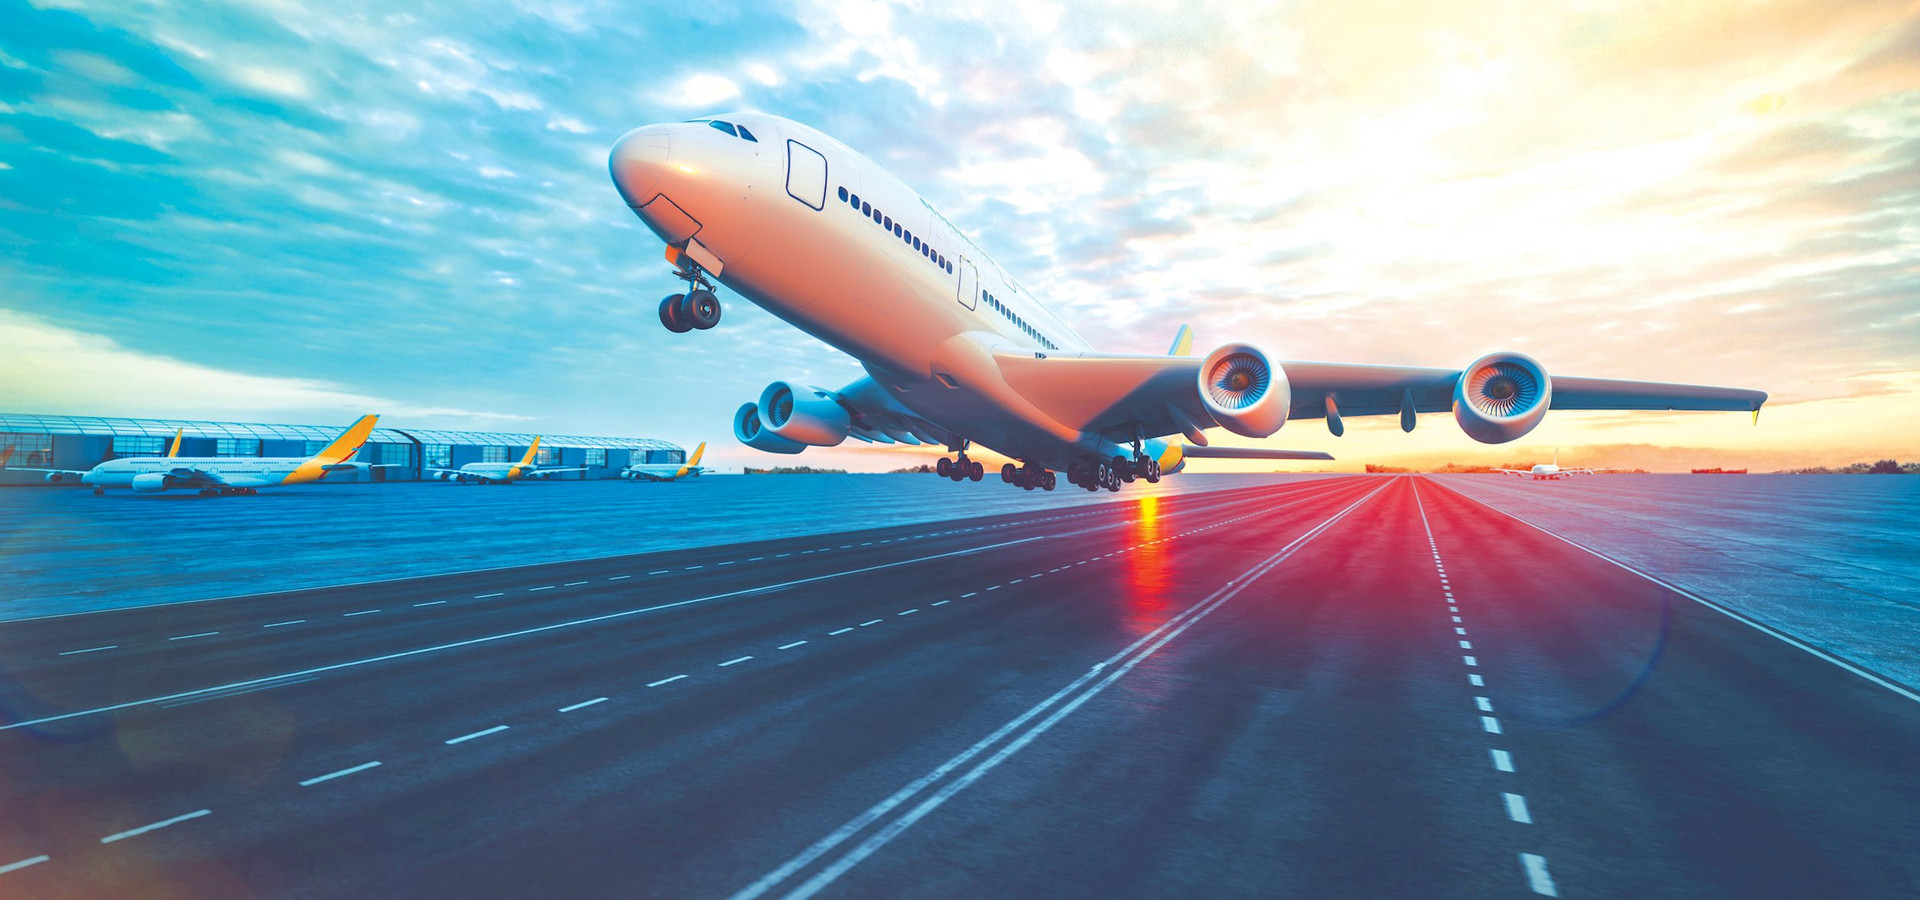 airplane-taking-off-from-airport-3d-render-illustration-compressed.jpeg